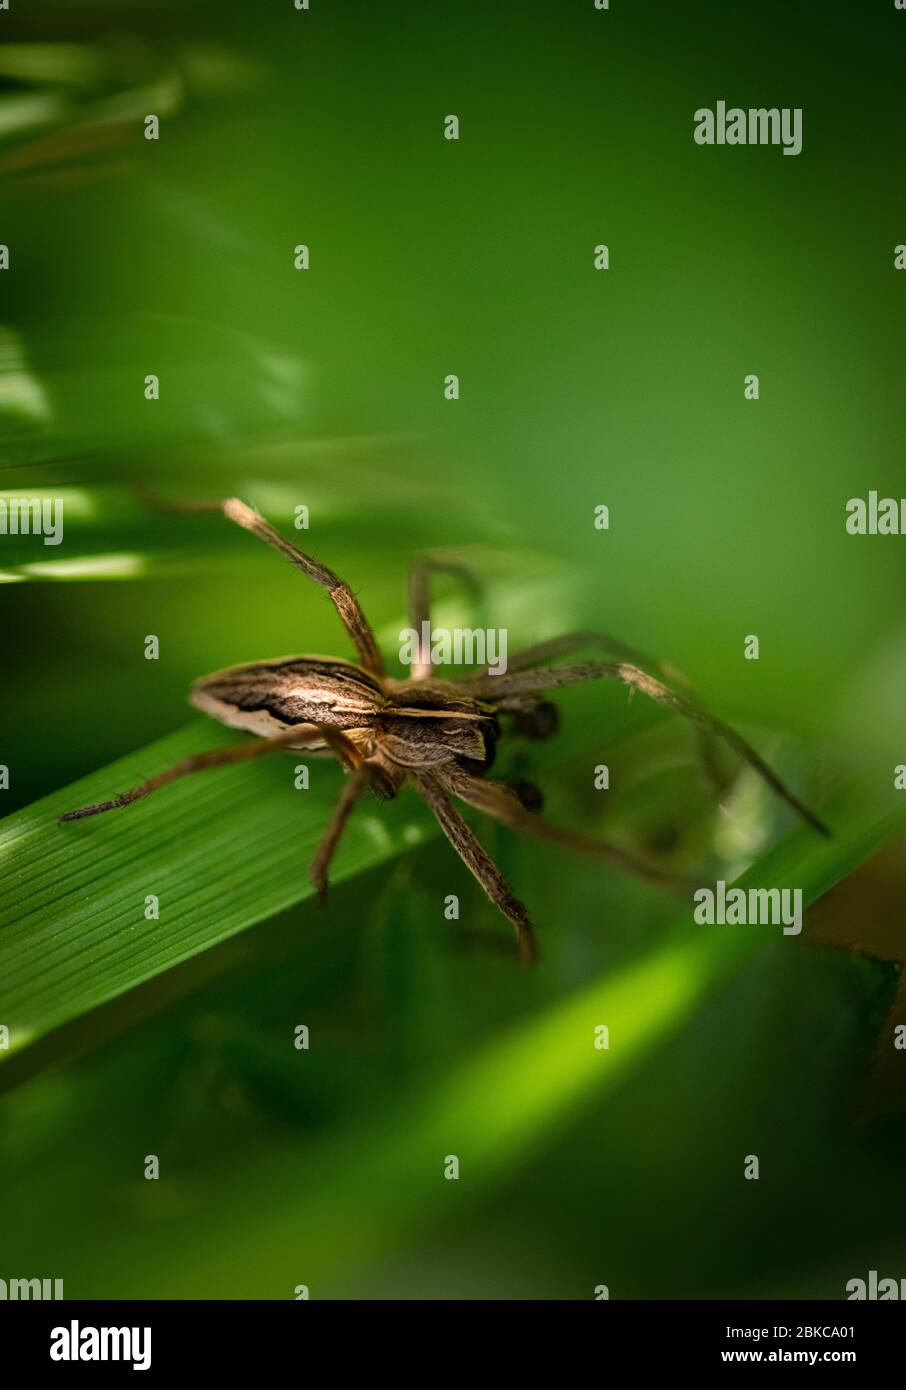 brown spider on green grass leaf Stock Photo